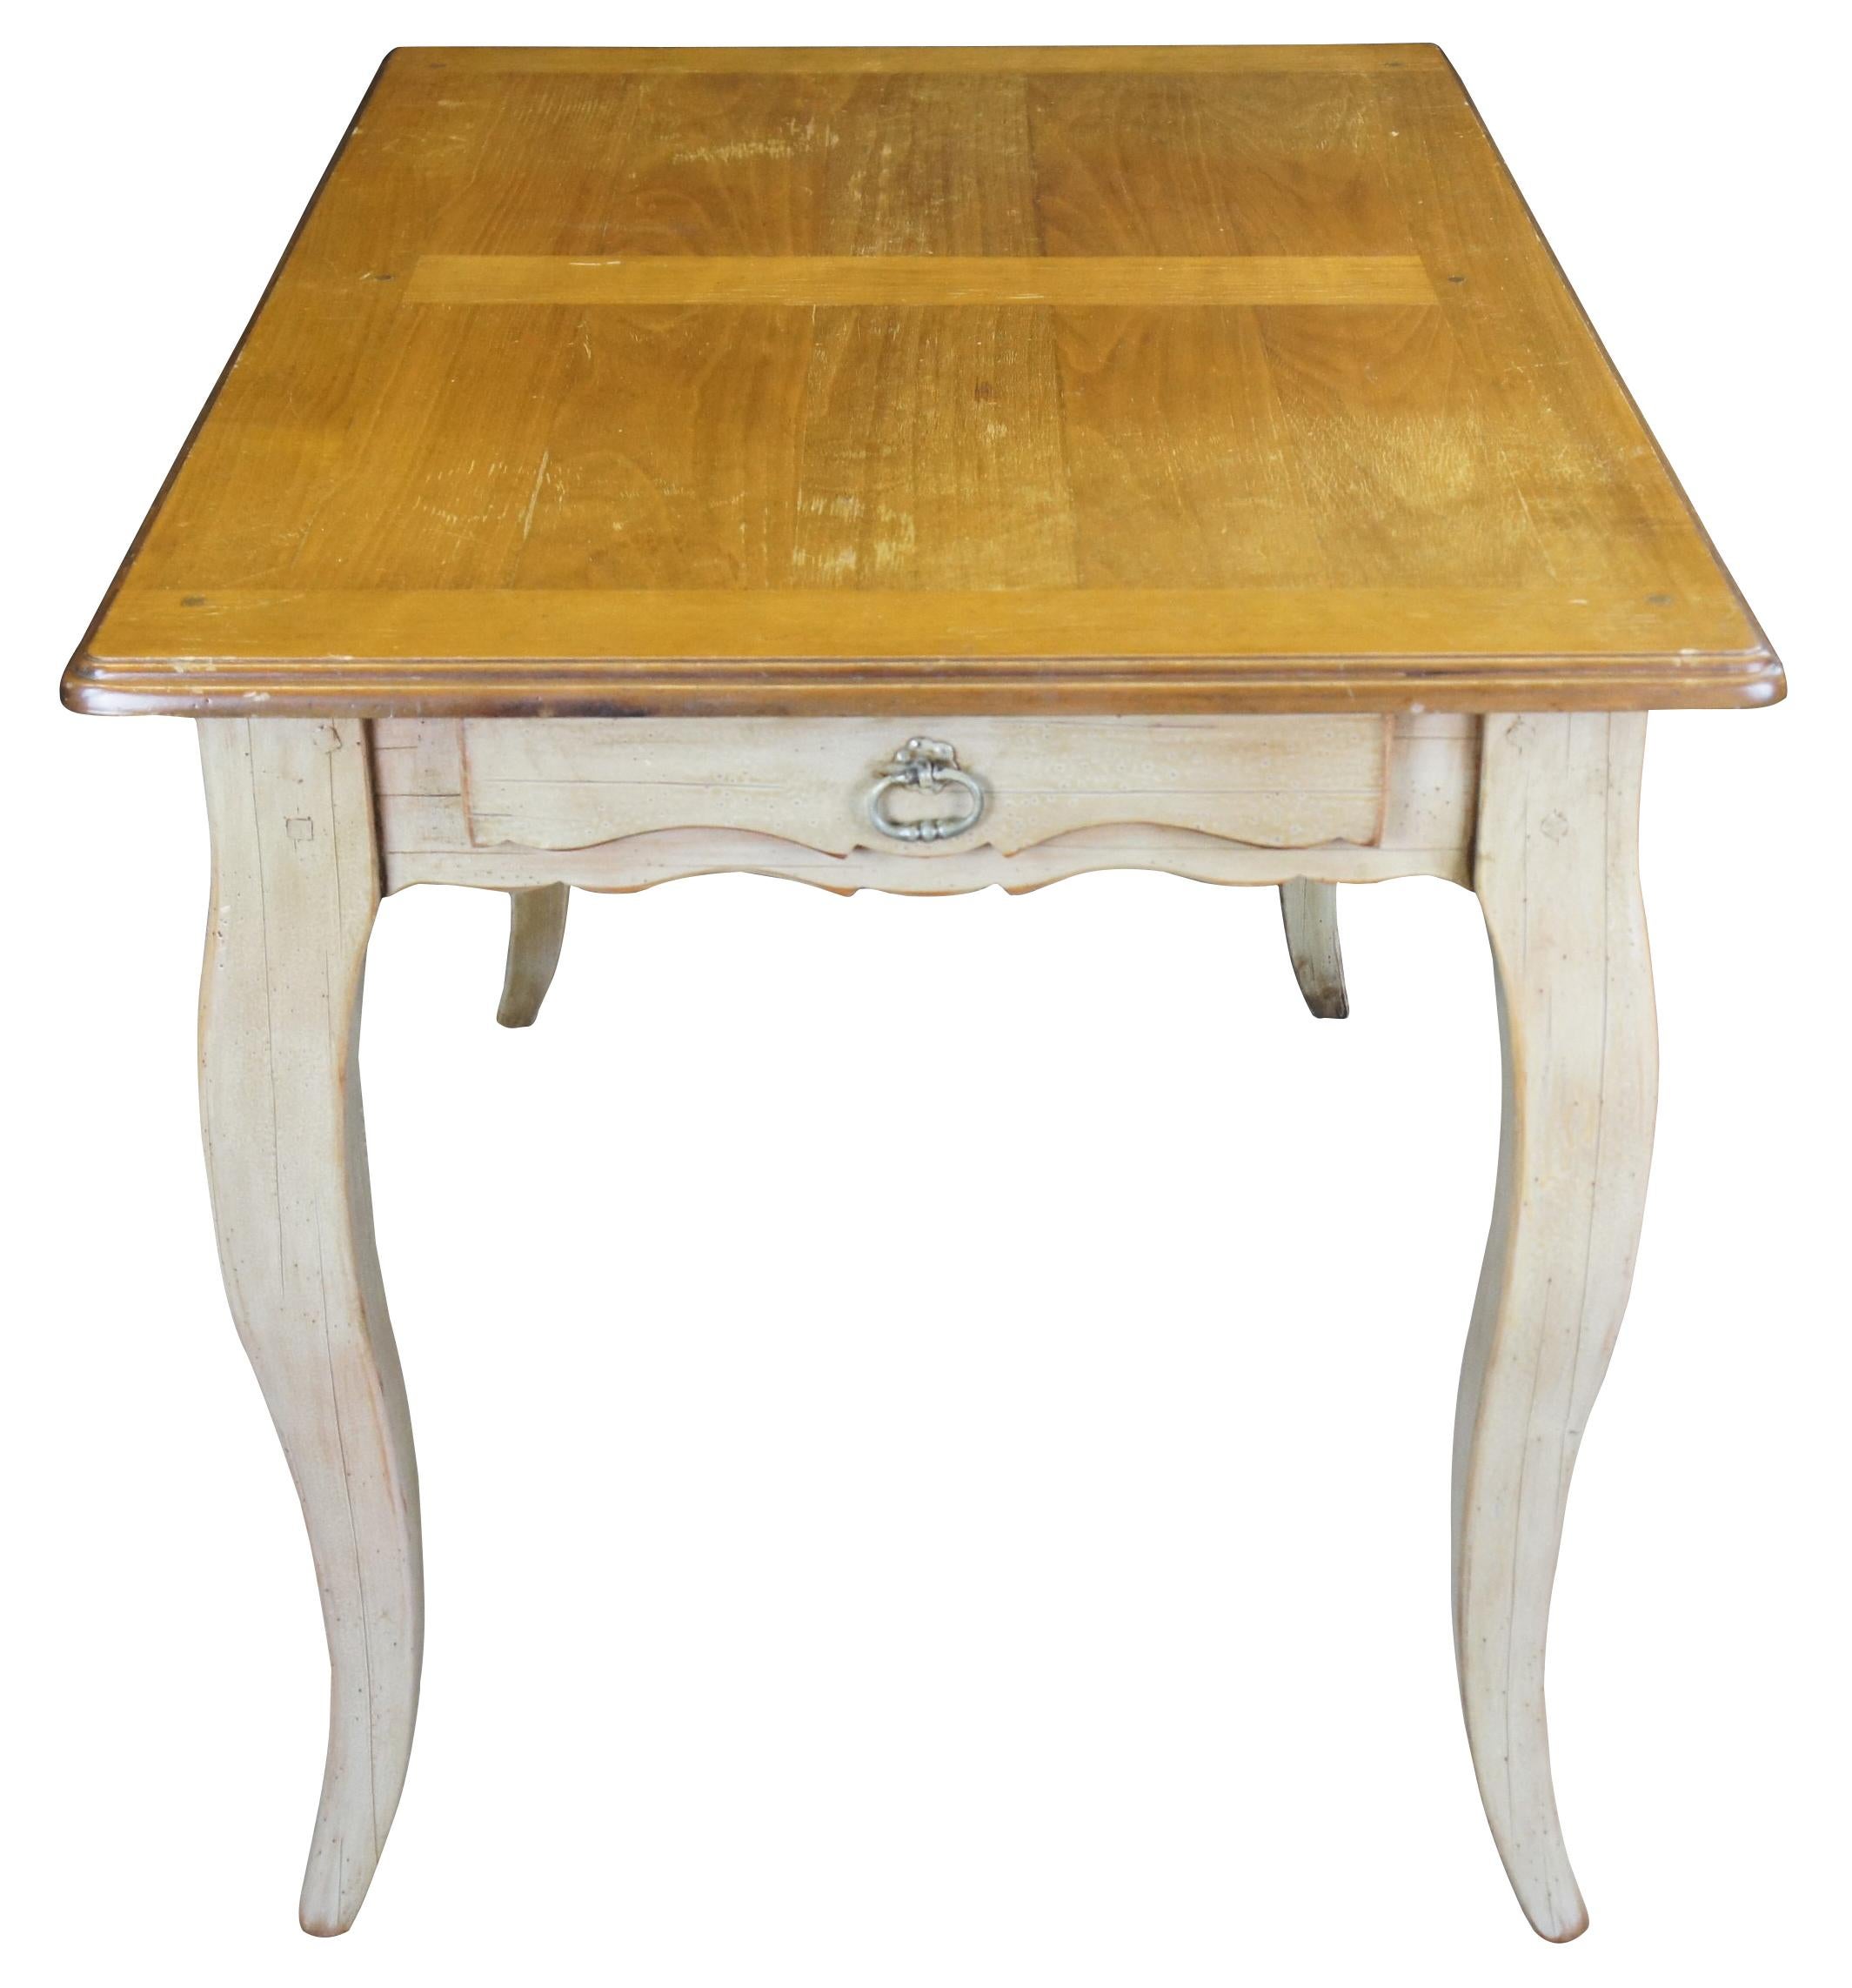 1980s Louis XV or Provincial inspired breakfast or dining table. Made from walnut with a washed base. Features a natural top over a serpentine cut apron, dovetailed drawer with brass hardware and cabriole legs. Measure: 45